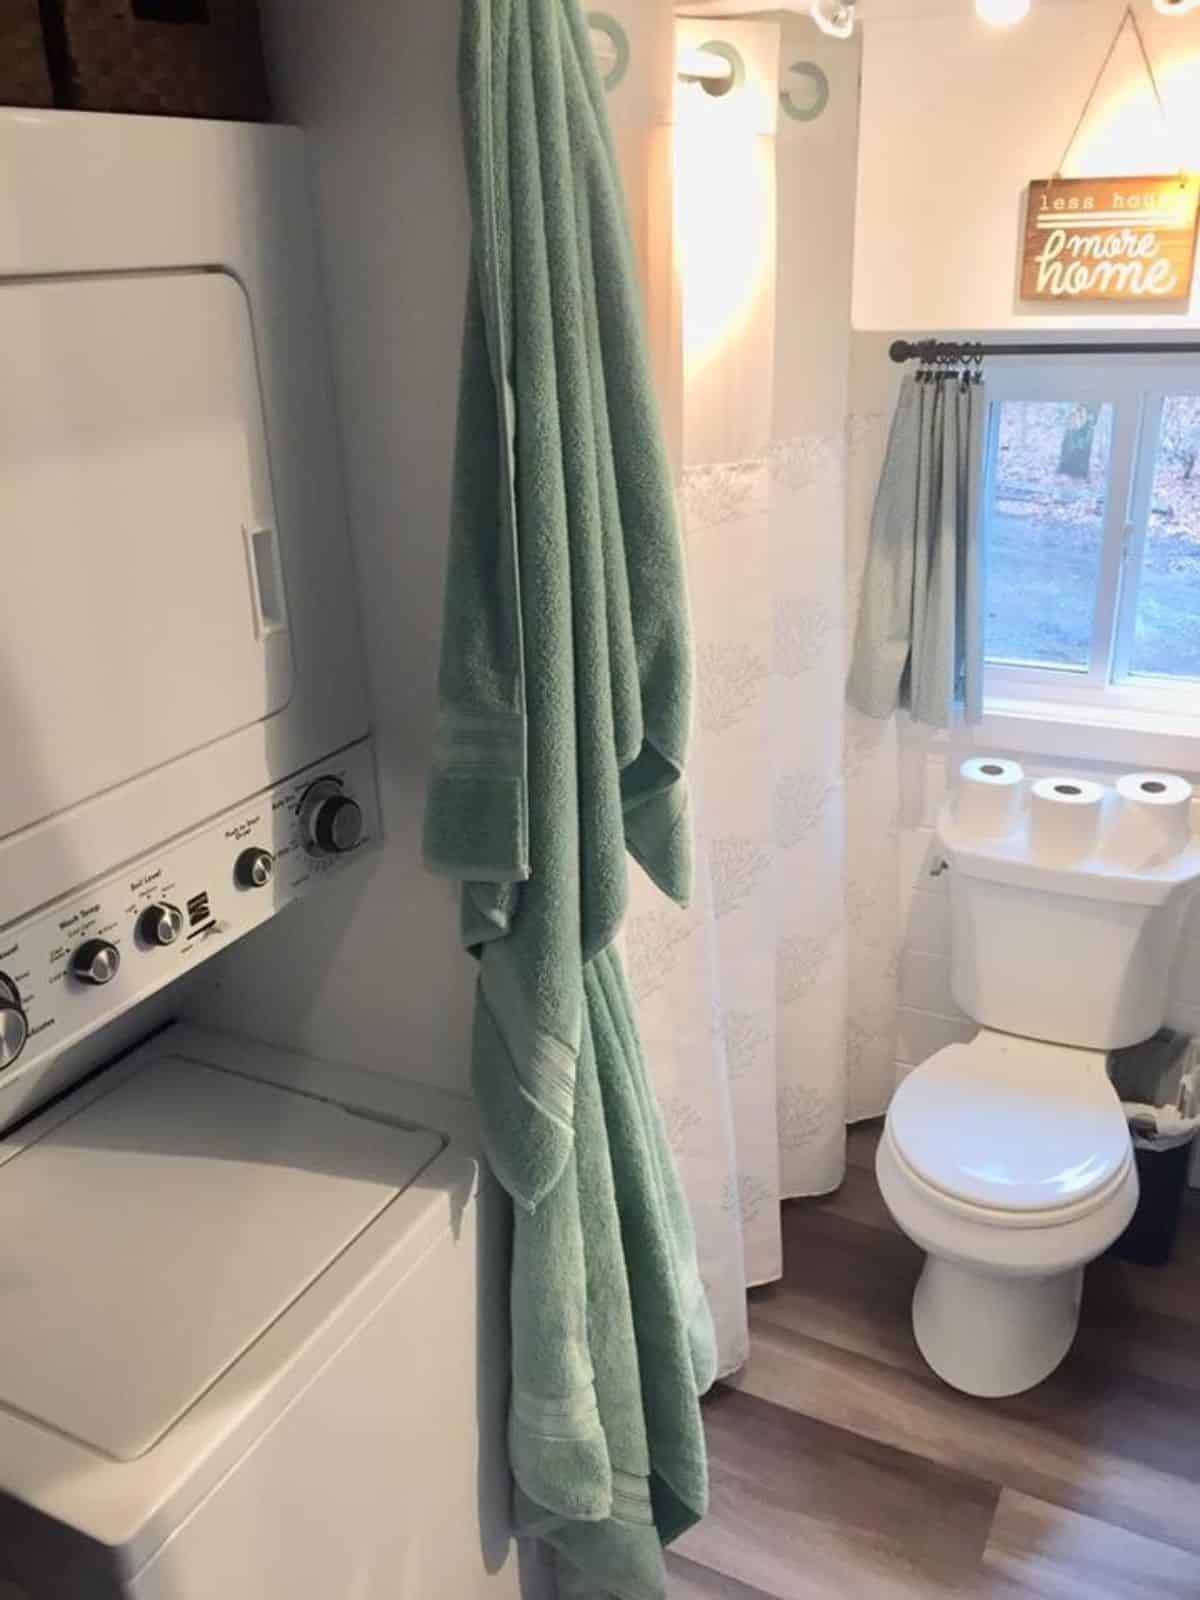 standard toilet and washer dryer combo in bathroom